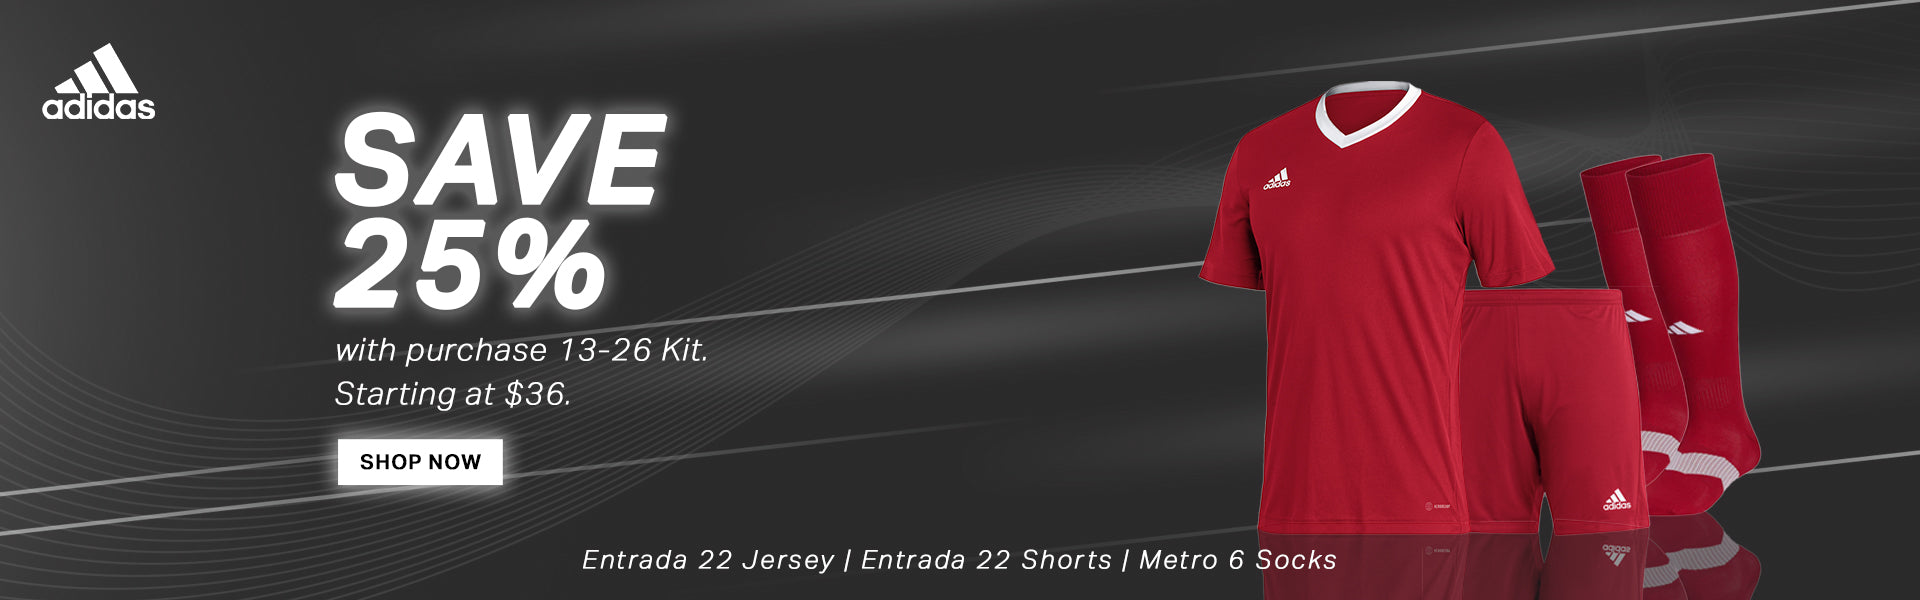 adidas red jersey, shorts and socks set for soccer teams at 25% off offer